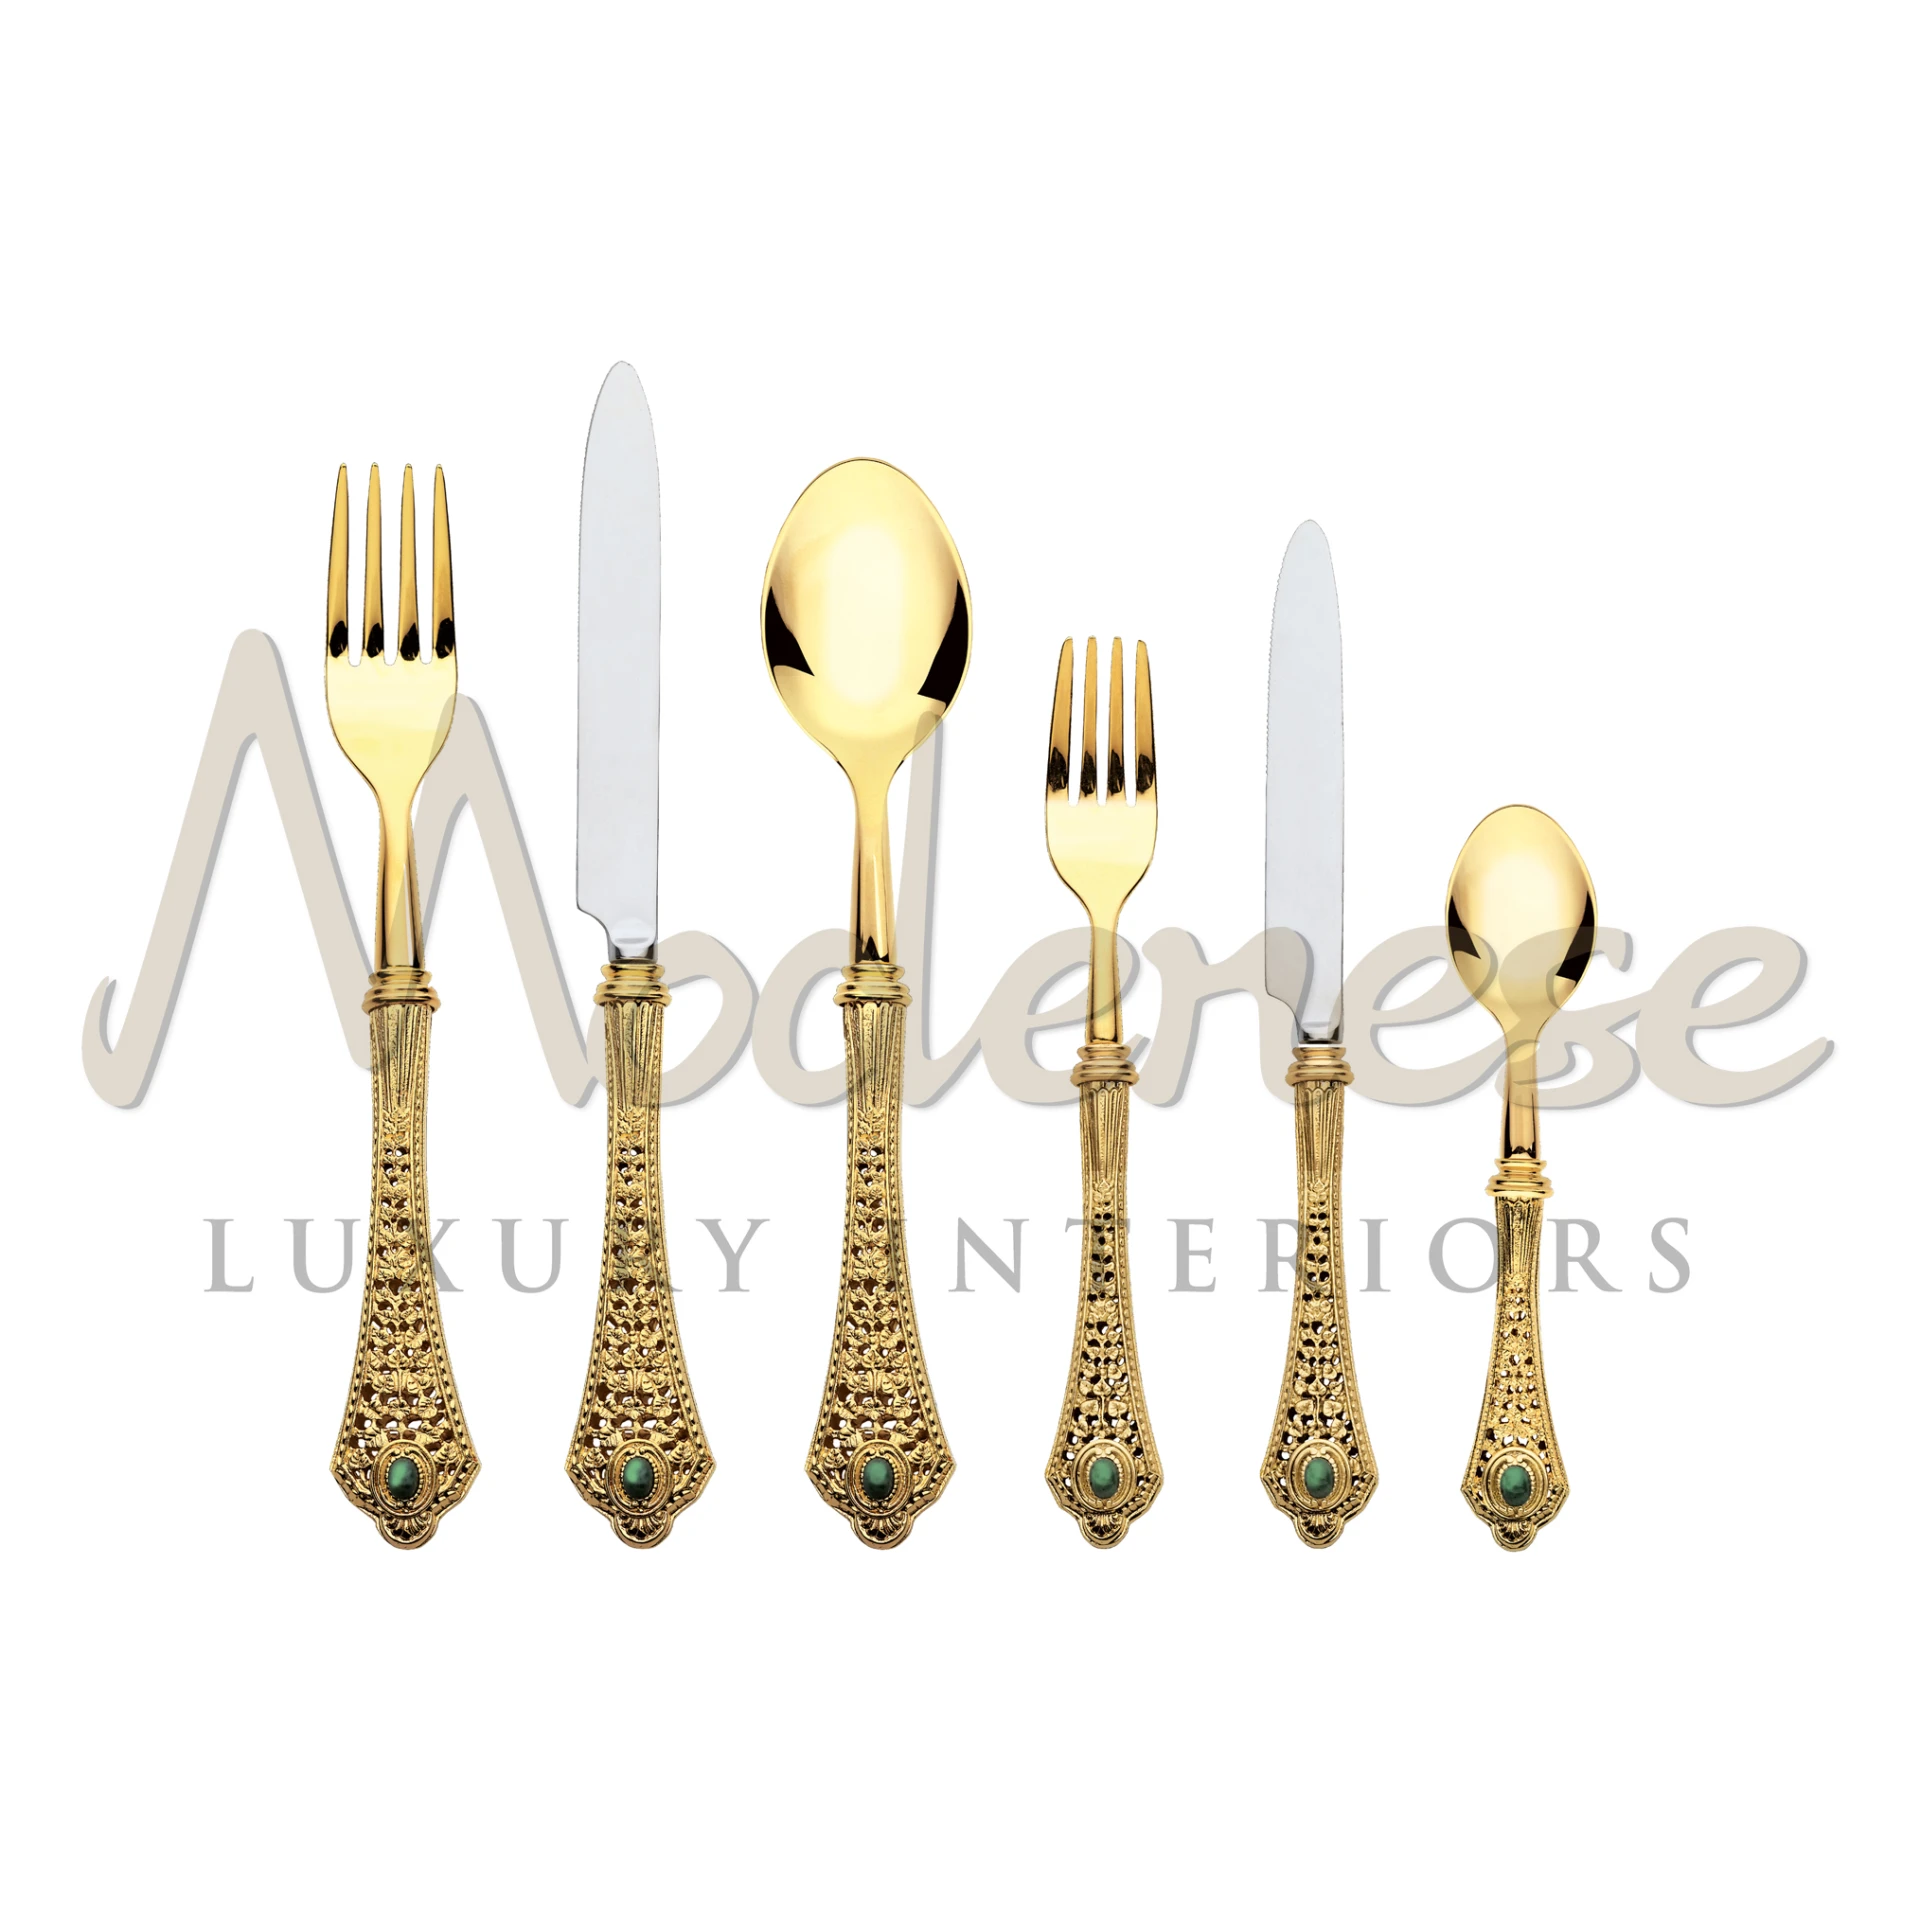 A luxurious Bronze & Inox cutlery set featuring intricate patterns and shiny green gems on the handles, set against a plain backdrop.